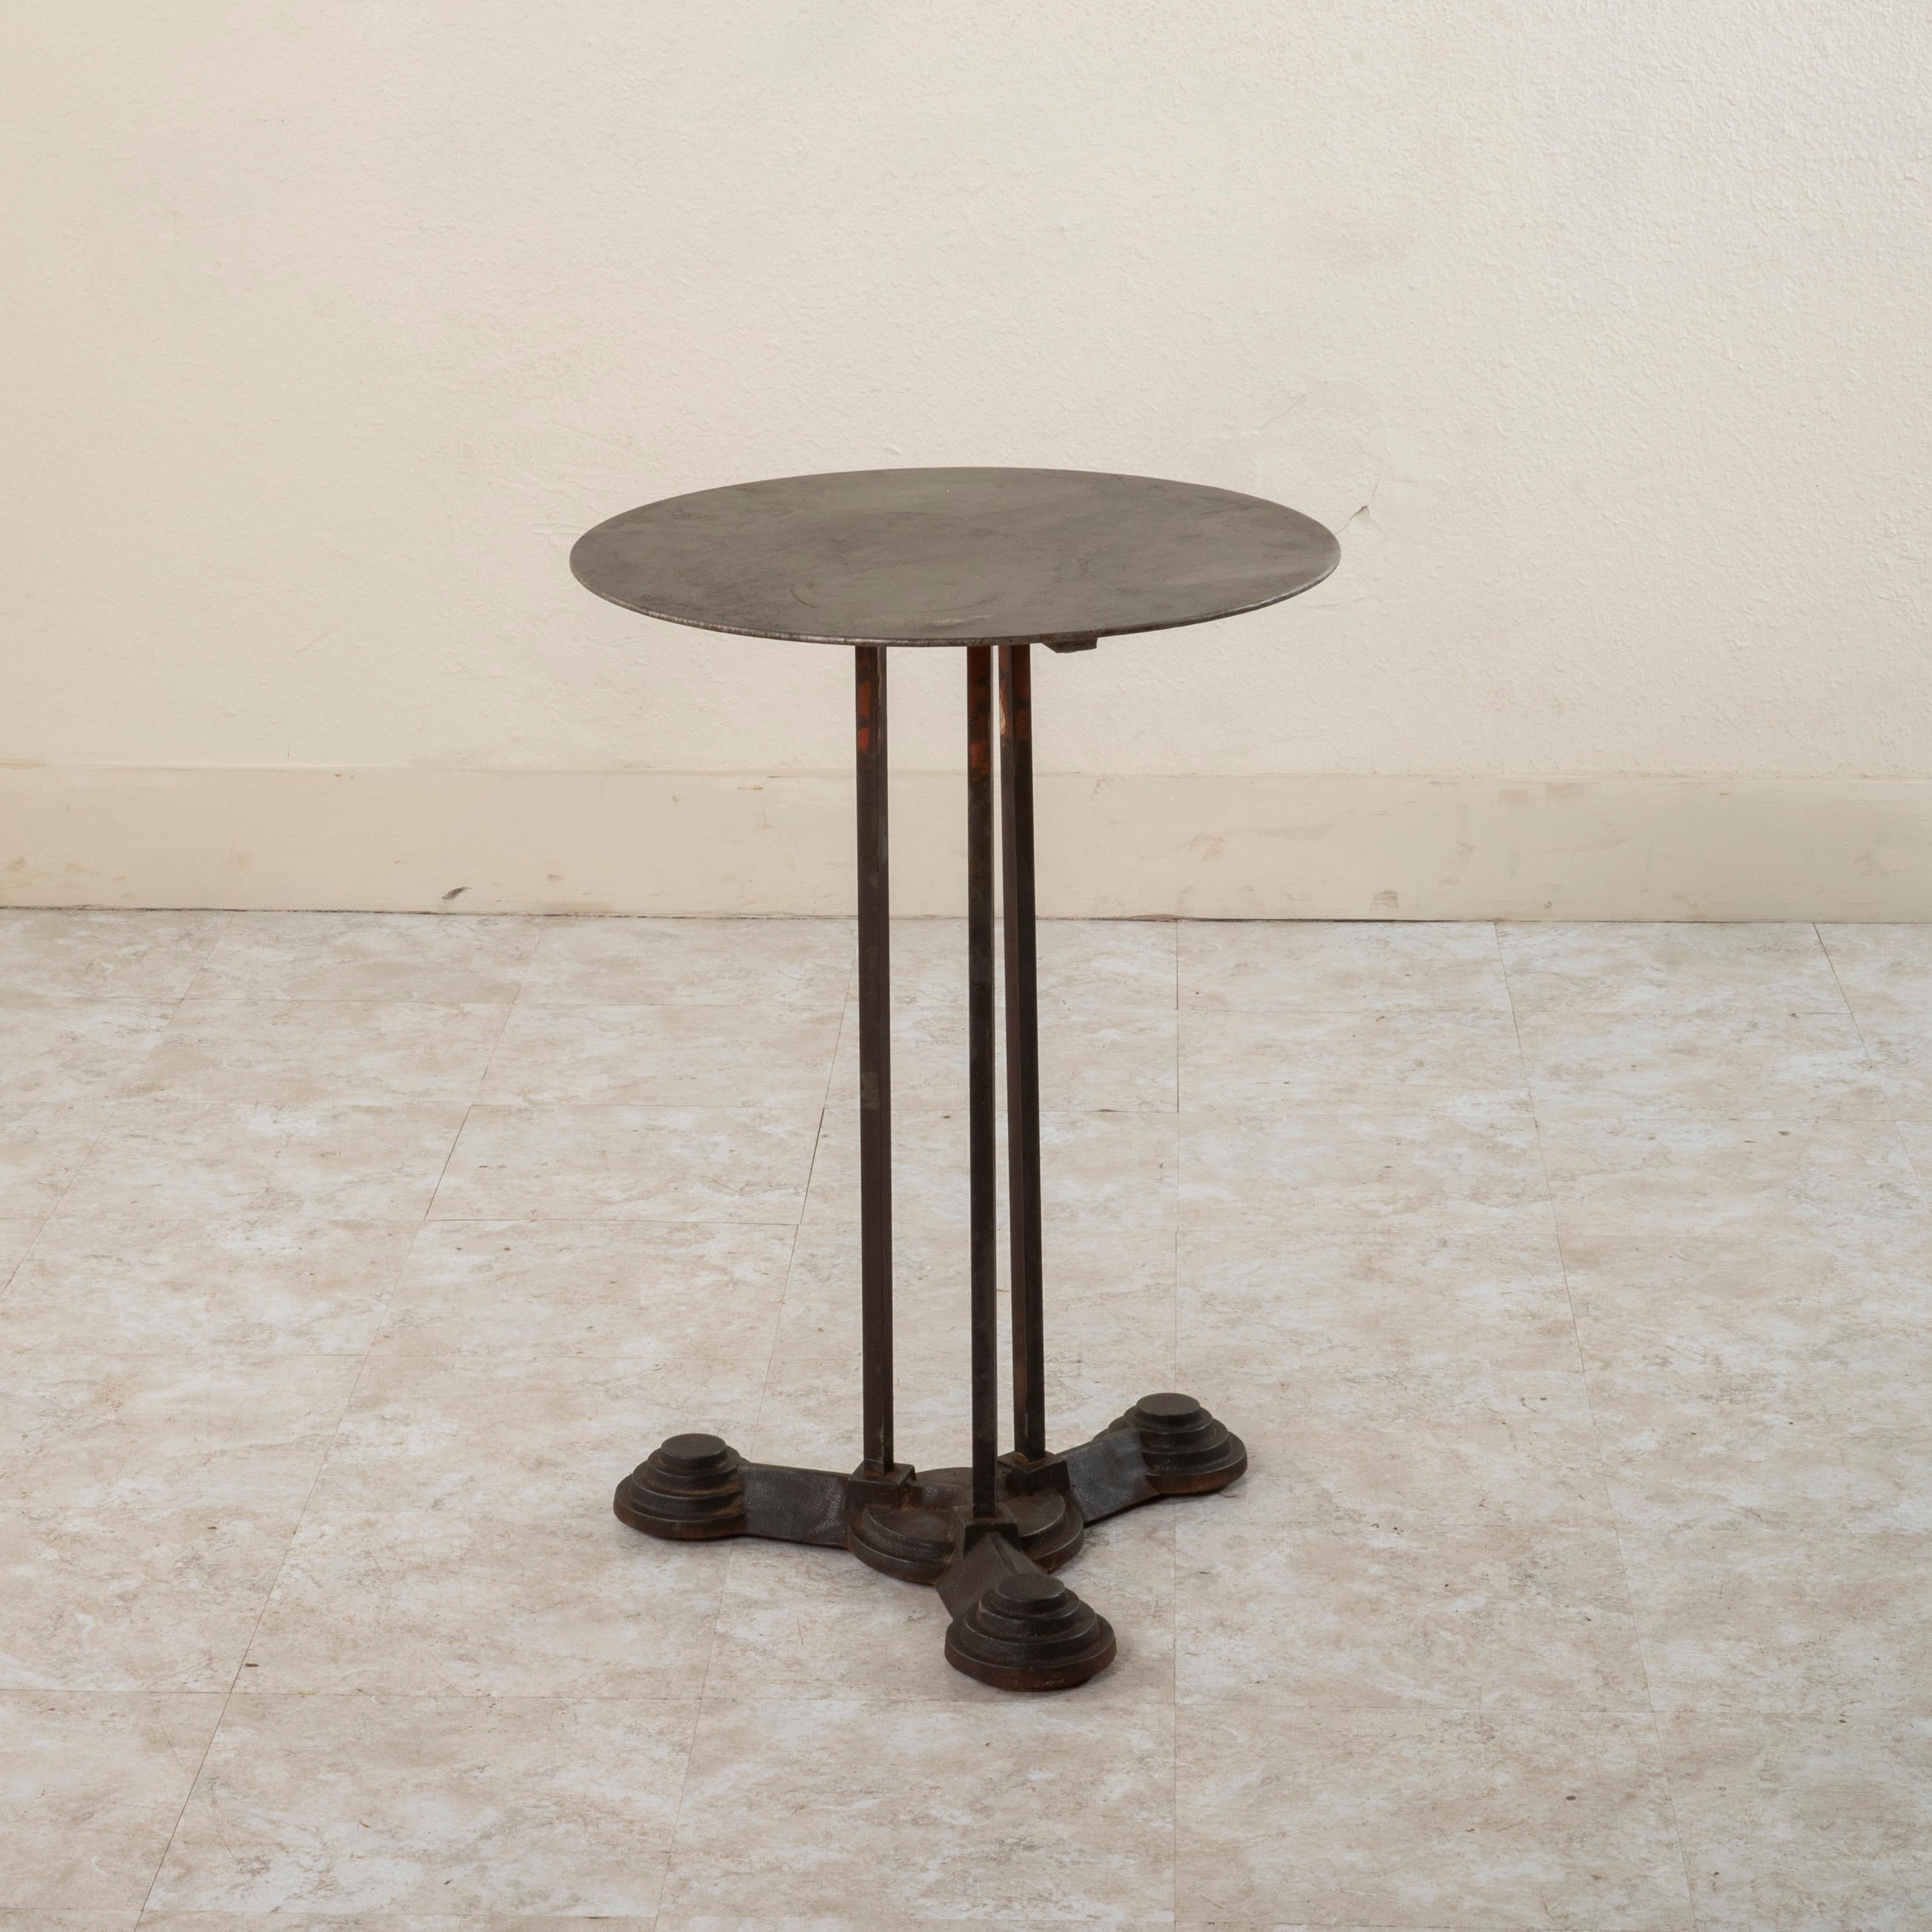 This early twentieth century French Art Deco period iron bistro table or side table features a 20 inch diameter metal top. The top rests on three legs joined to a tripod base. The feet of the base are detailed with concentric terraced circles